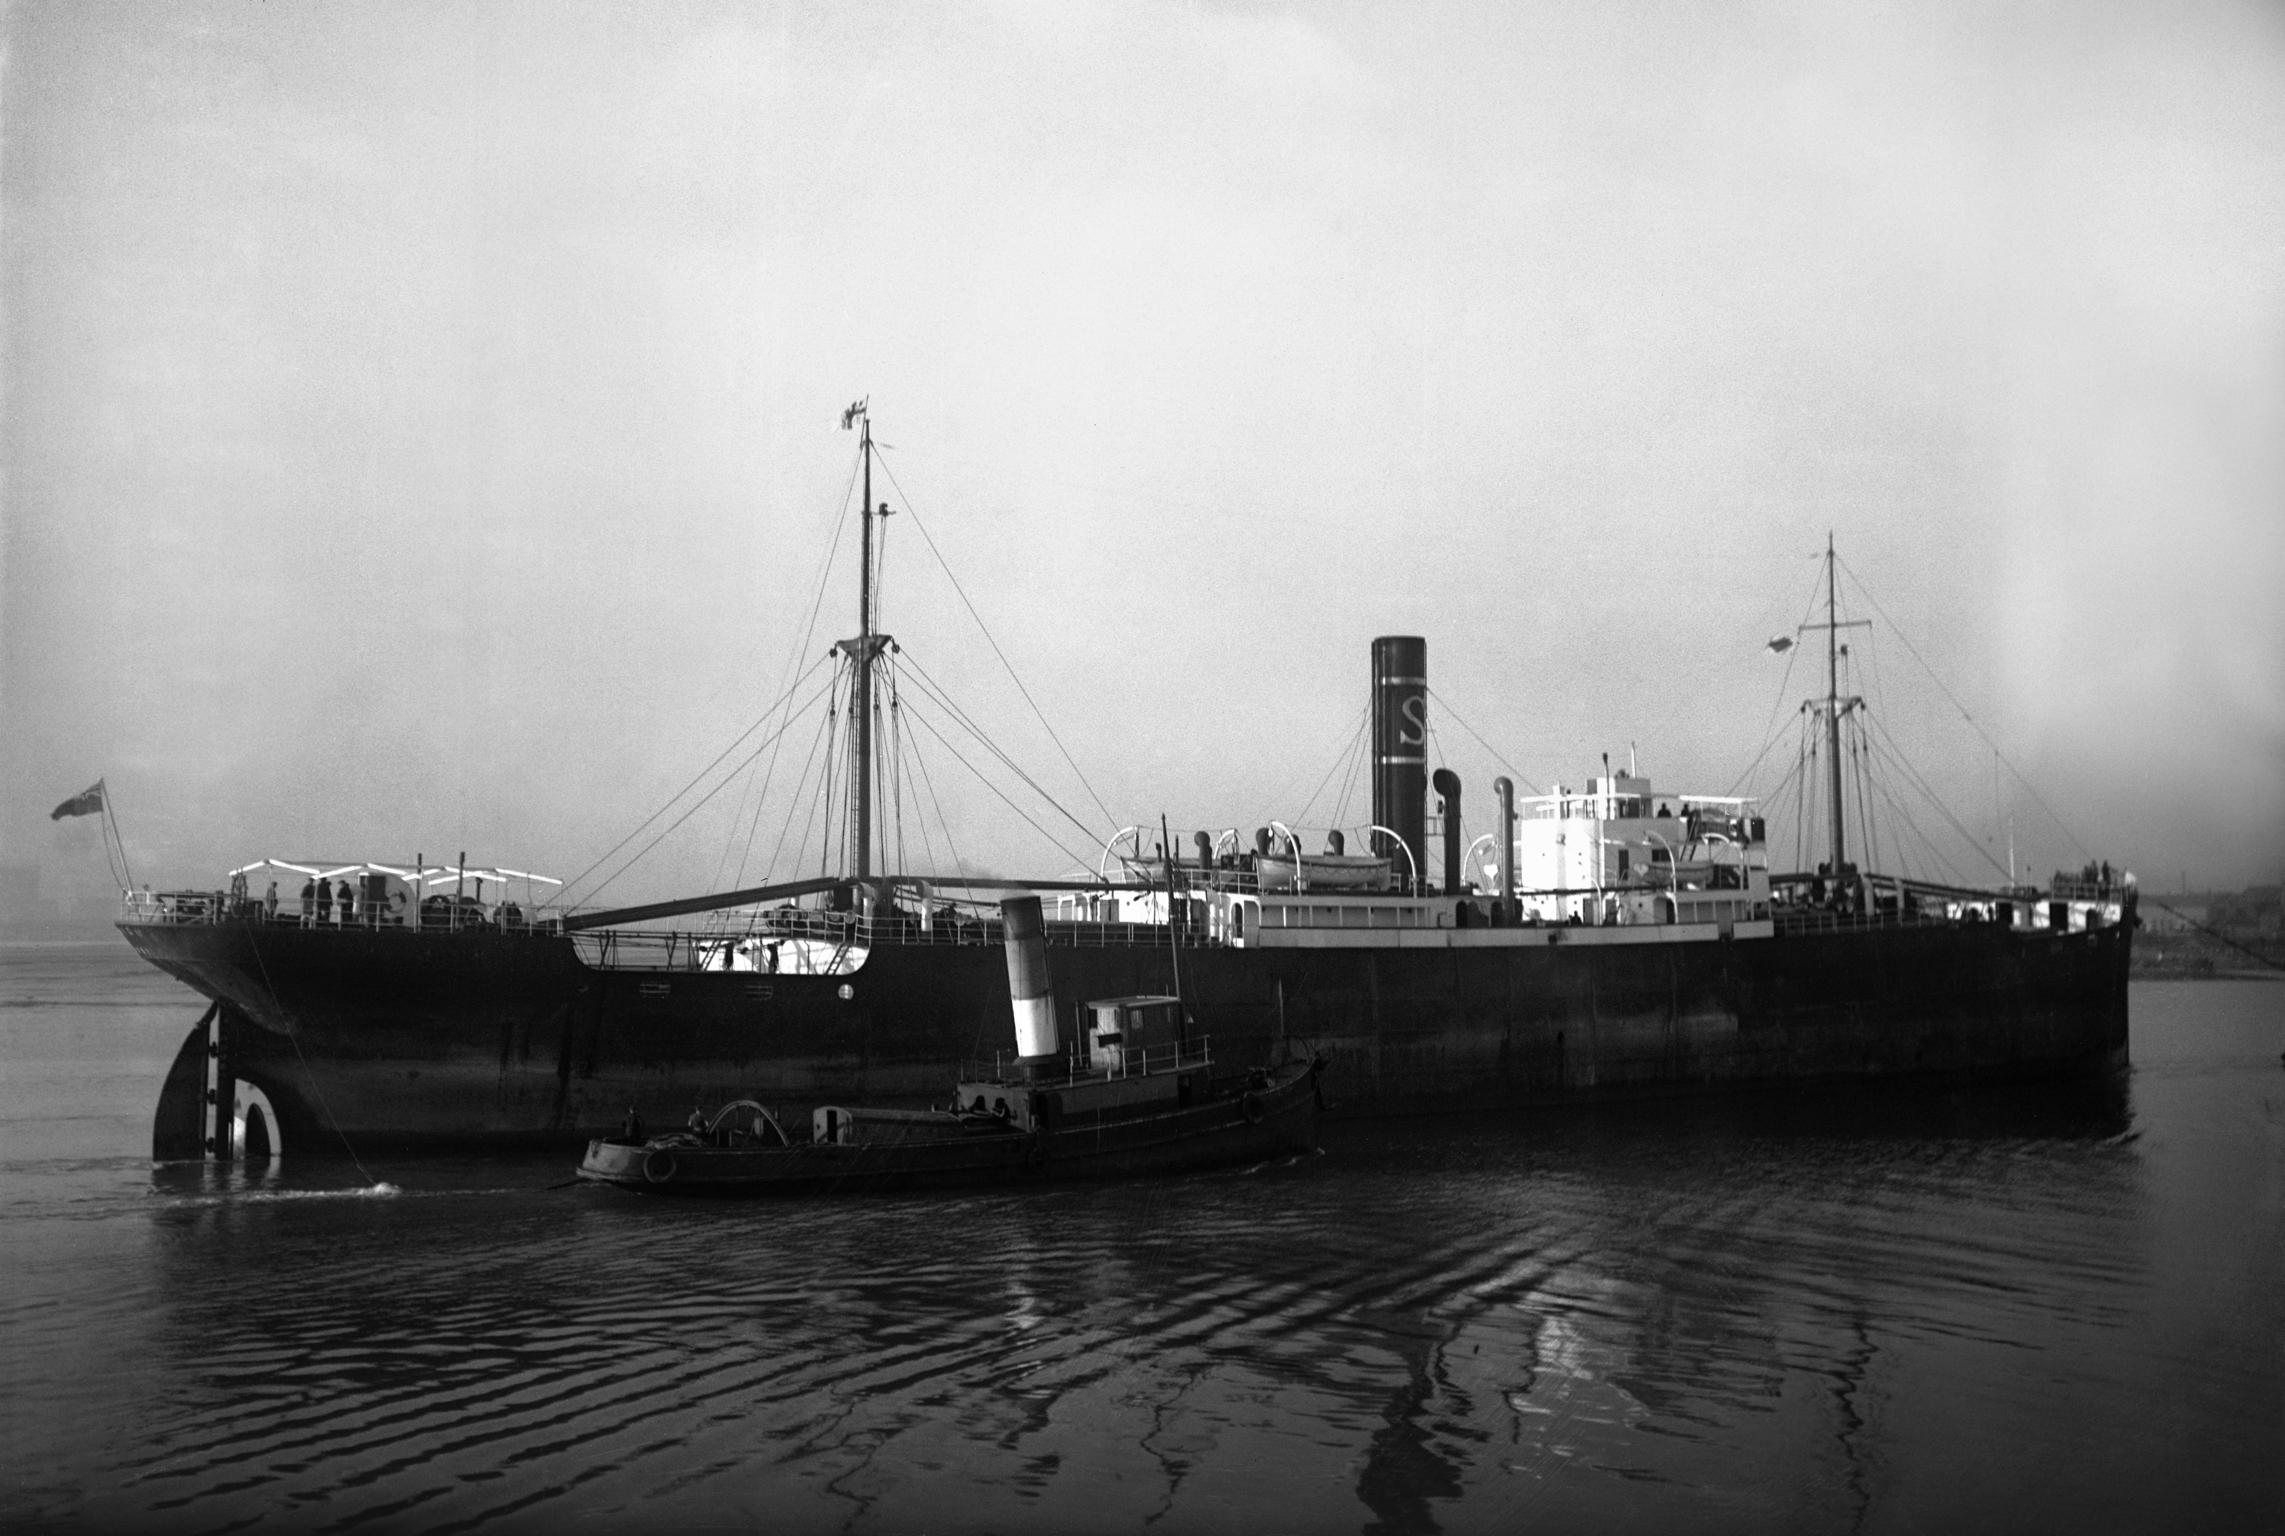 S.S. AMICUS, glass negative